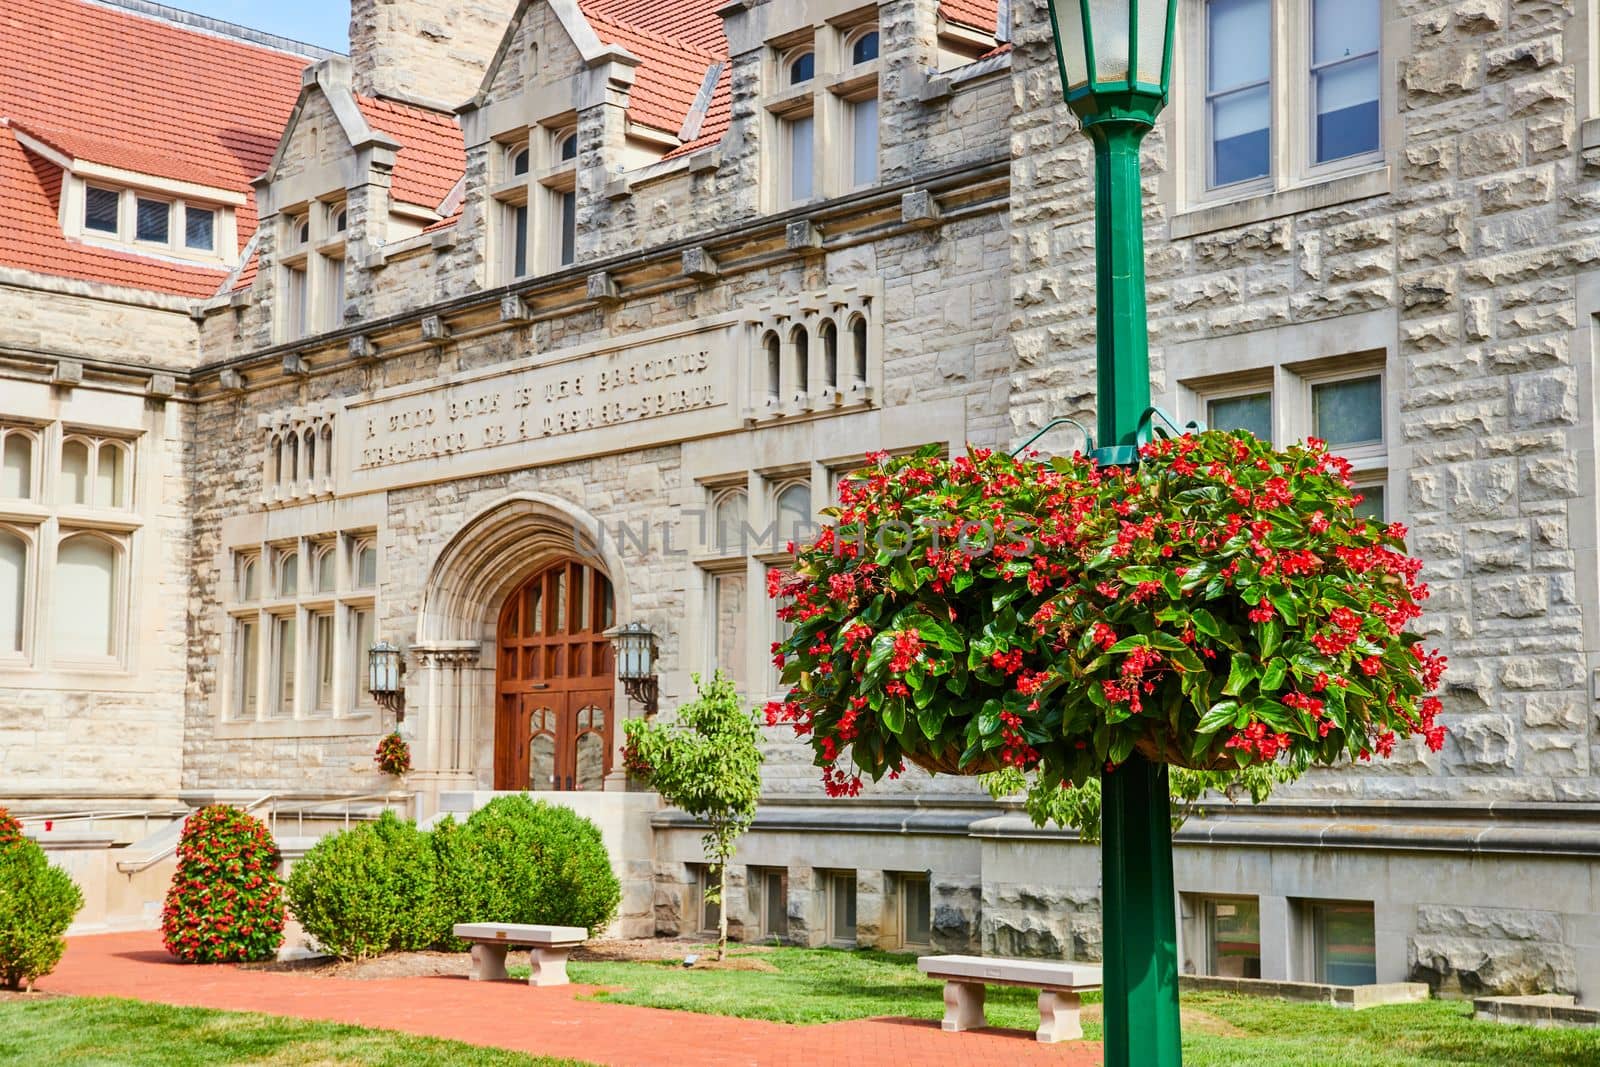 Image of Indiana University college campus exterior buildings with flowers